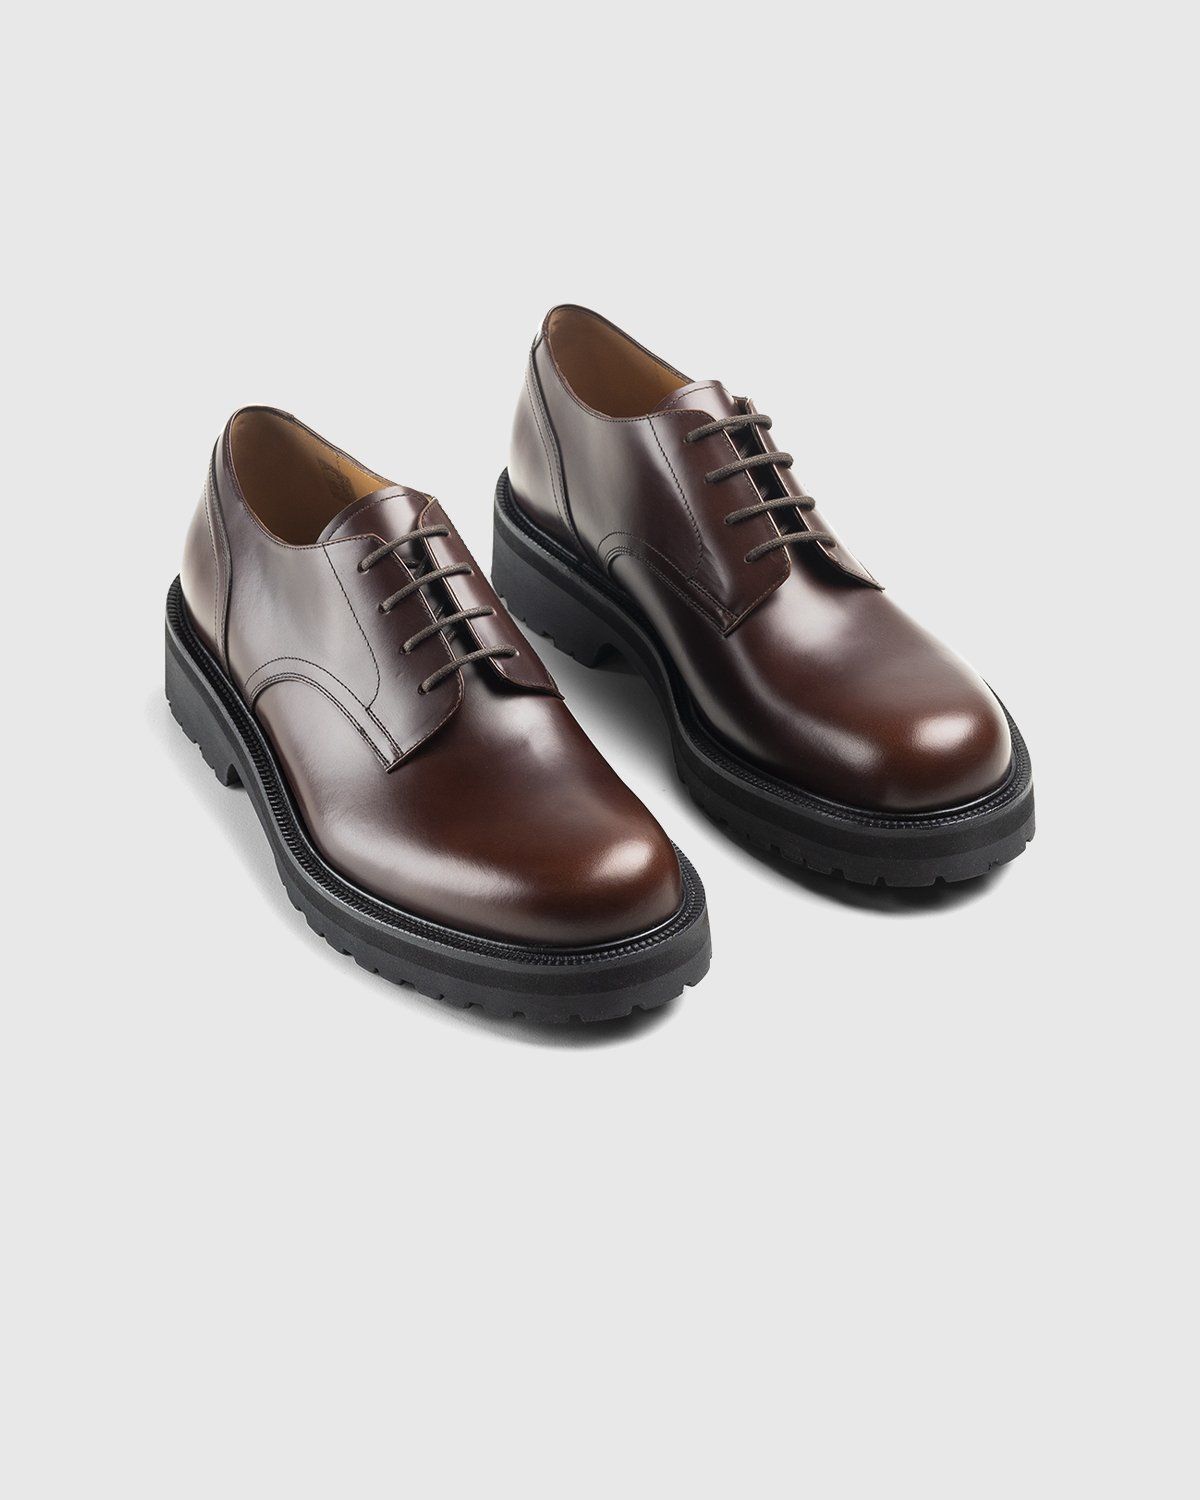 Dries van Noten – Leather Lace-Up Derby Shoes Brown - Shoes - Brown - Image 3